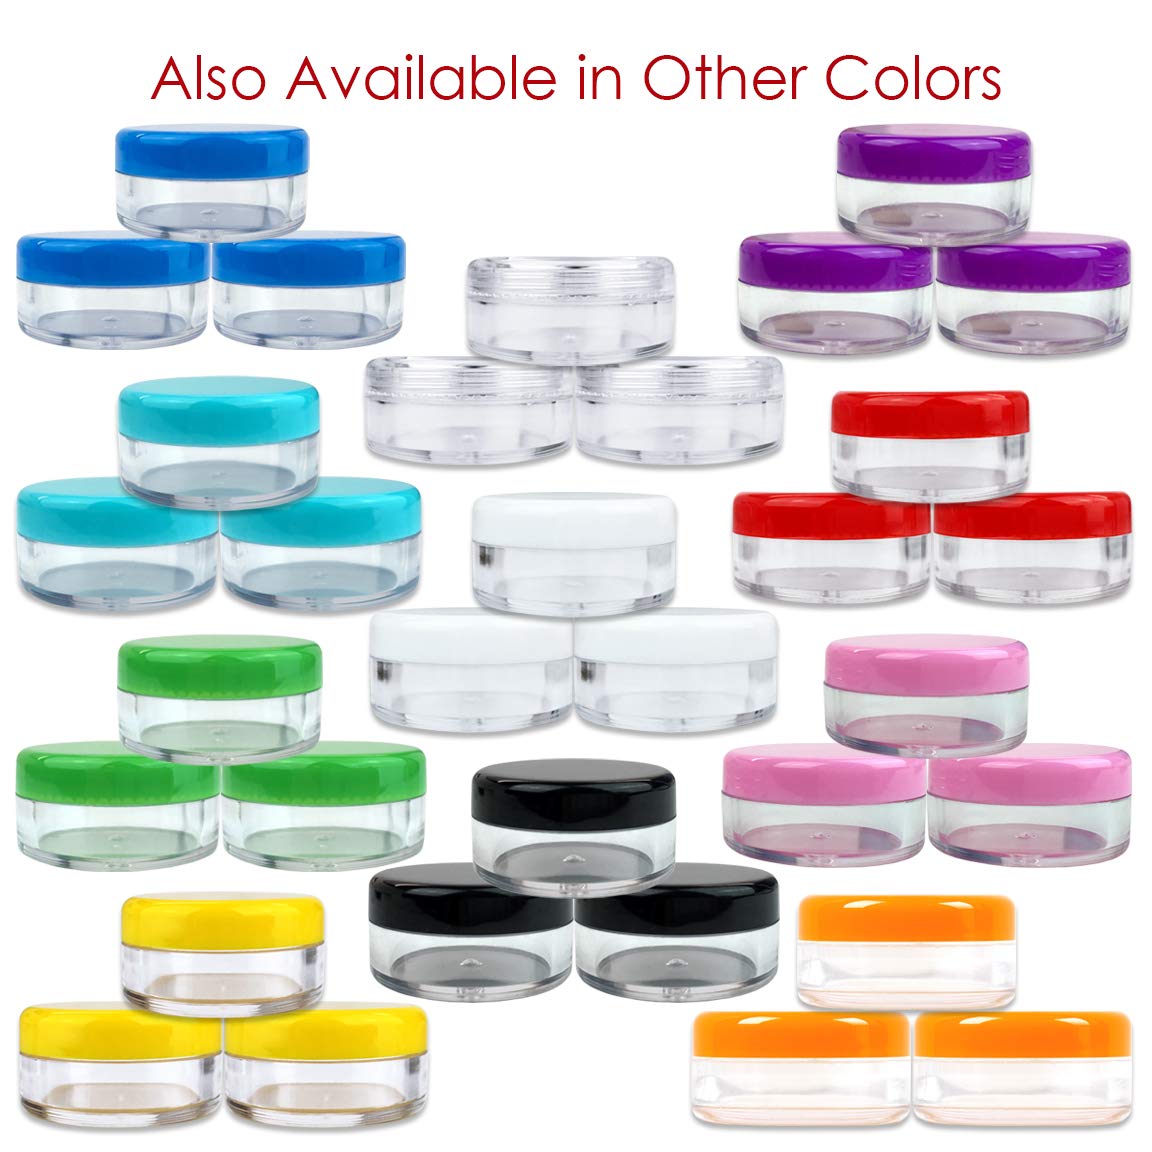 50 New Empty 5 Grams Acrylic Clear Round Jars - BPA Free Containers for Cosmetic, Lotion, Cream, Makeup, Bead, Eye shadow, Rhinestone, Samples, Pot, 5g/5ml (Clear Lid (50 Jars)